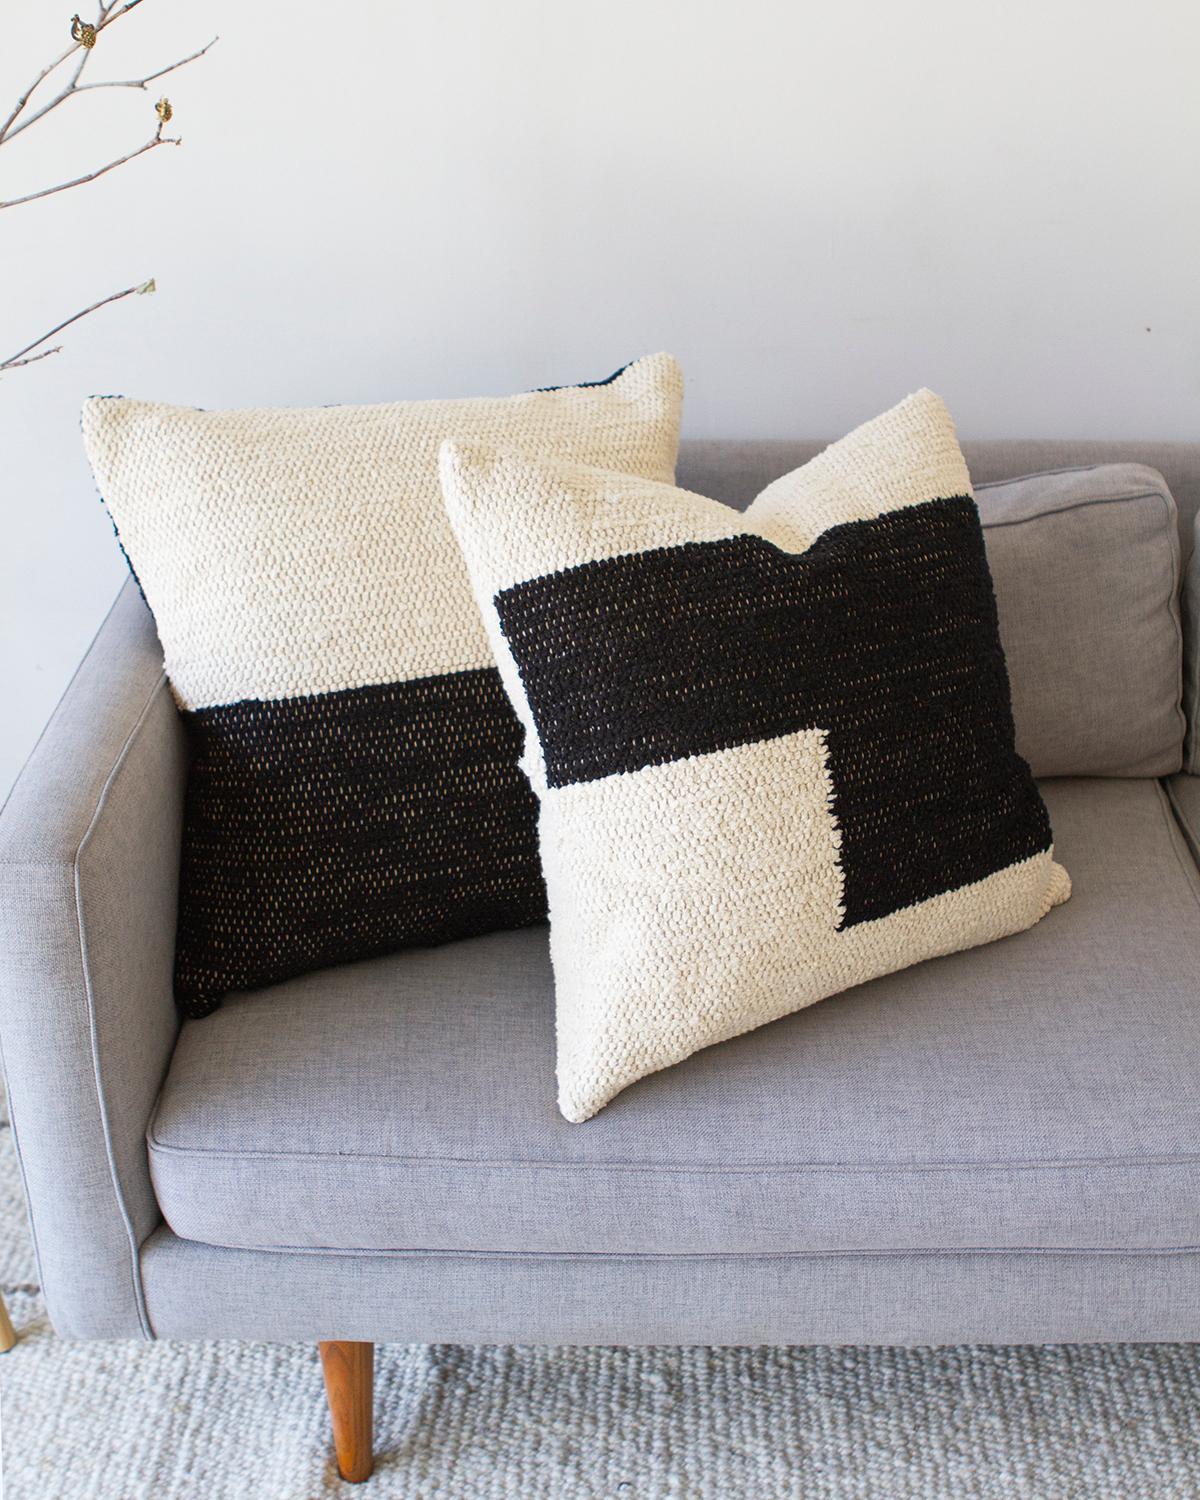 A geometric textured throw pillow for your couch or bed. This black and cream cotton throw pillow is made from this handwoven cotton and is perfect for a high traffic area like the living room couch. Put two matching pillows on either side of the